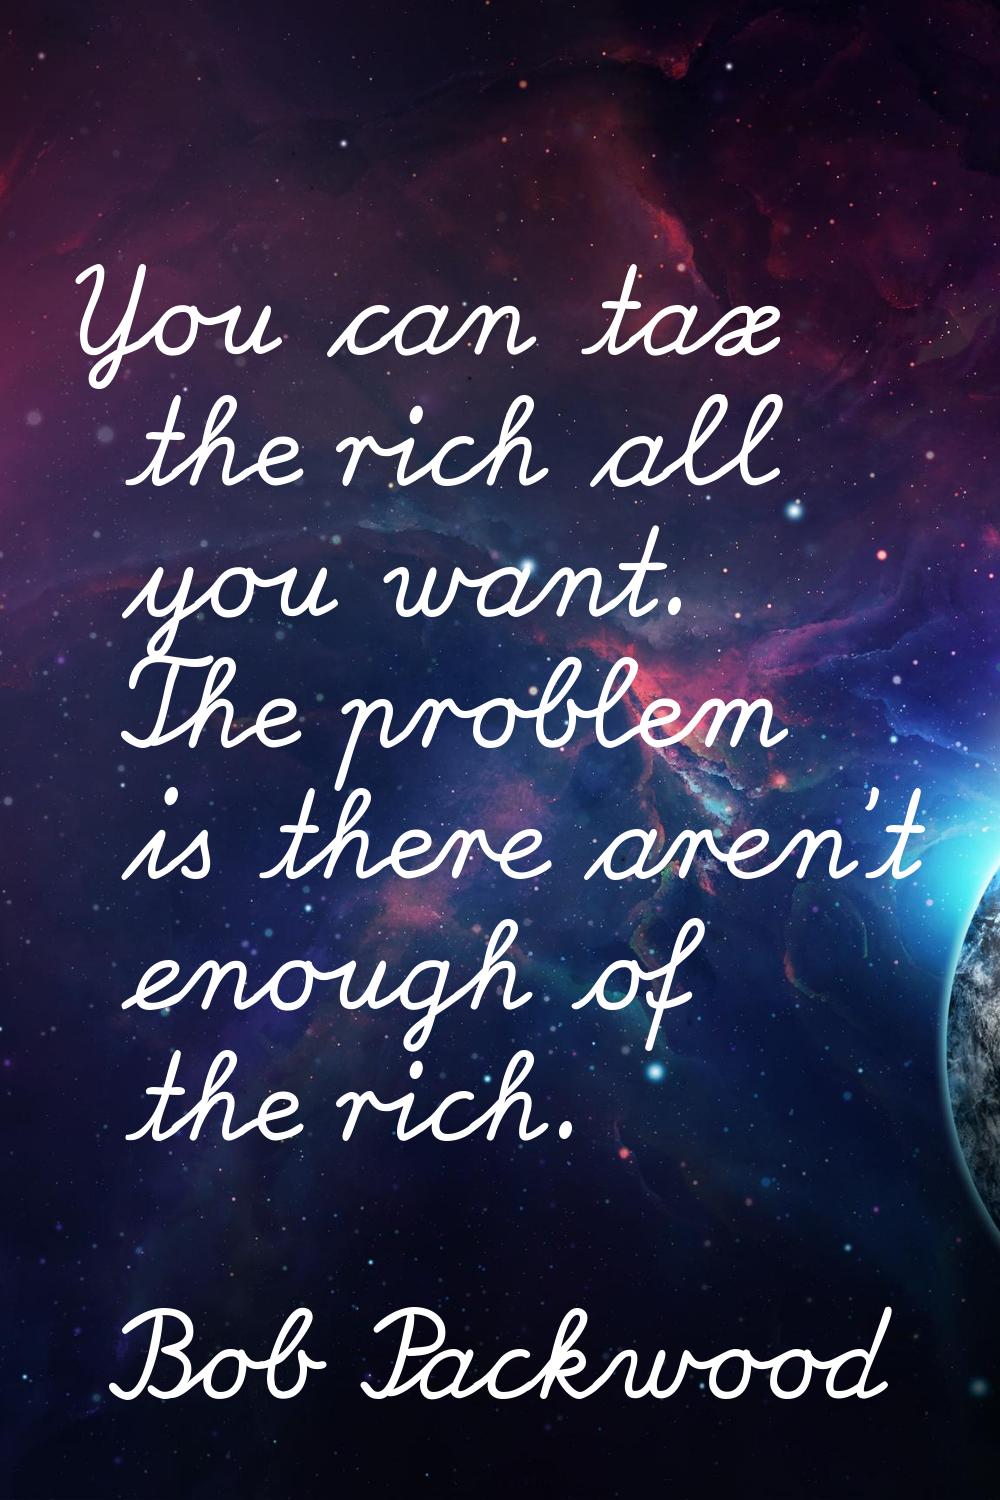 You can tax the rich all you want. The problem is there aren't enough of the rich.